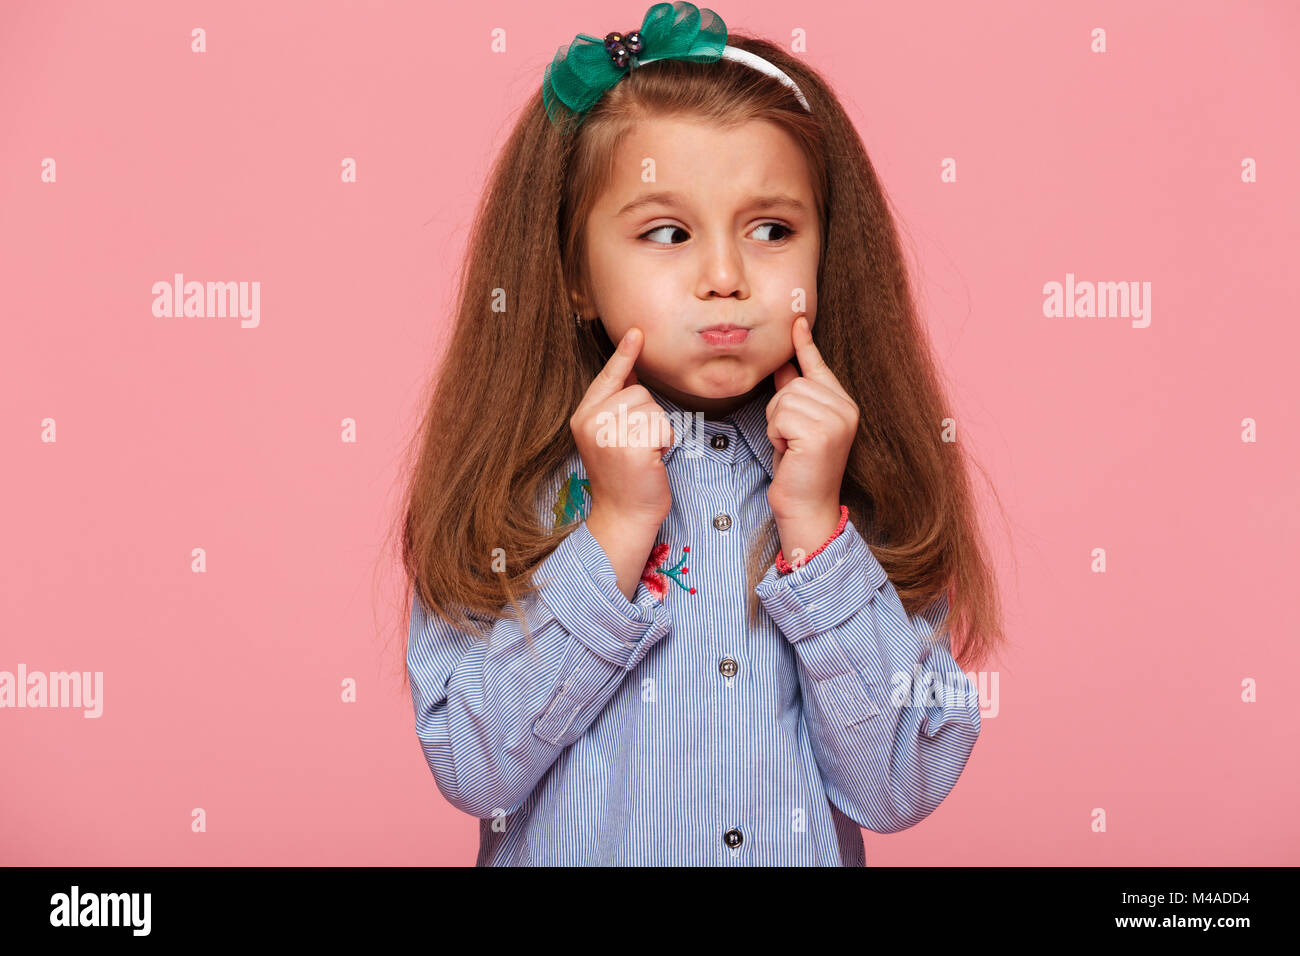 Caucasian sweet little girl 5-6 years with beautiful long auburn hair blowing up her cheeks, touching face over pink background Stock Photo